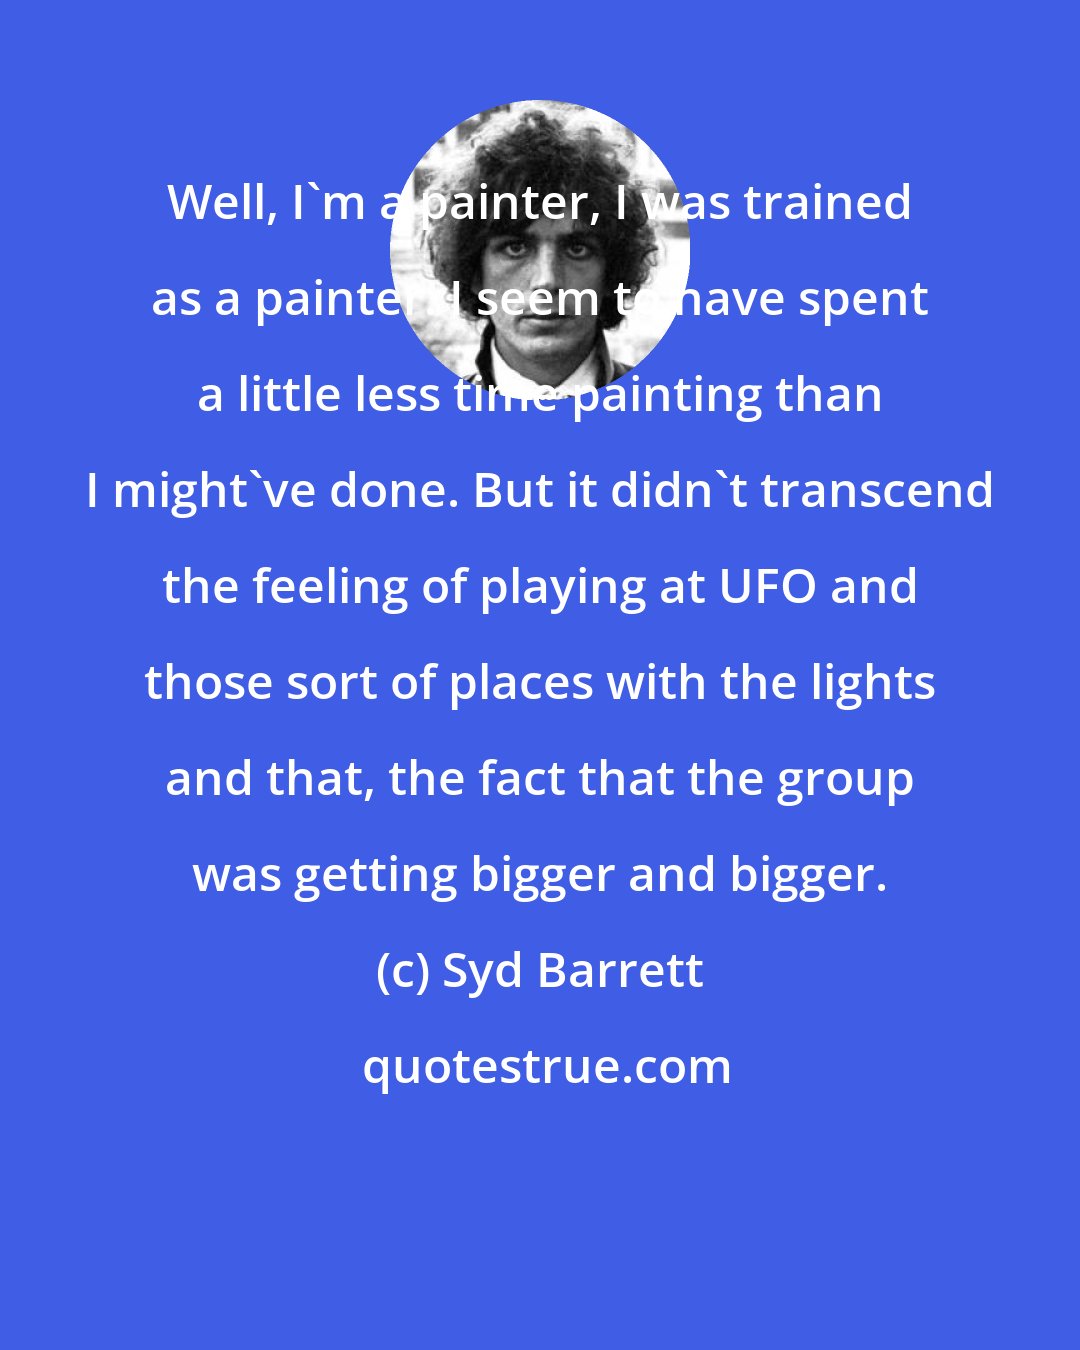 Syd Barrett: Well, I'm a painter, I was trained as a painter. I seem to have spent a little less time painting than I might've done. But it didn't transcend the feeling of playing at UFO and those sort of places with the lights and that, the fact that the group was getting bigger and bigger.